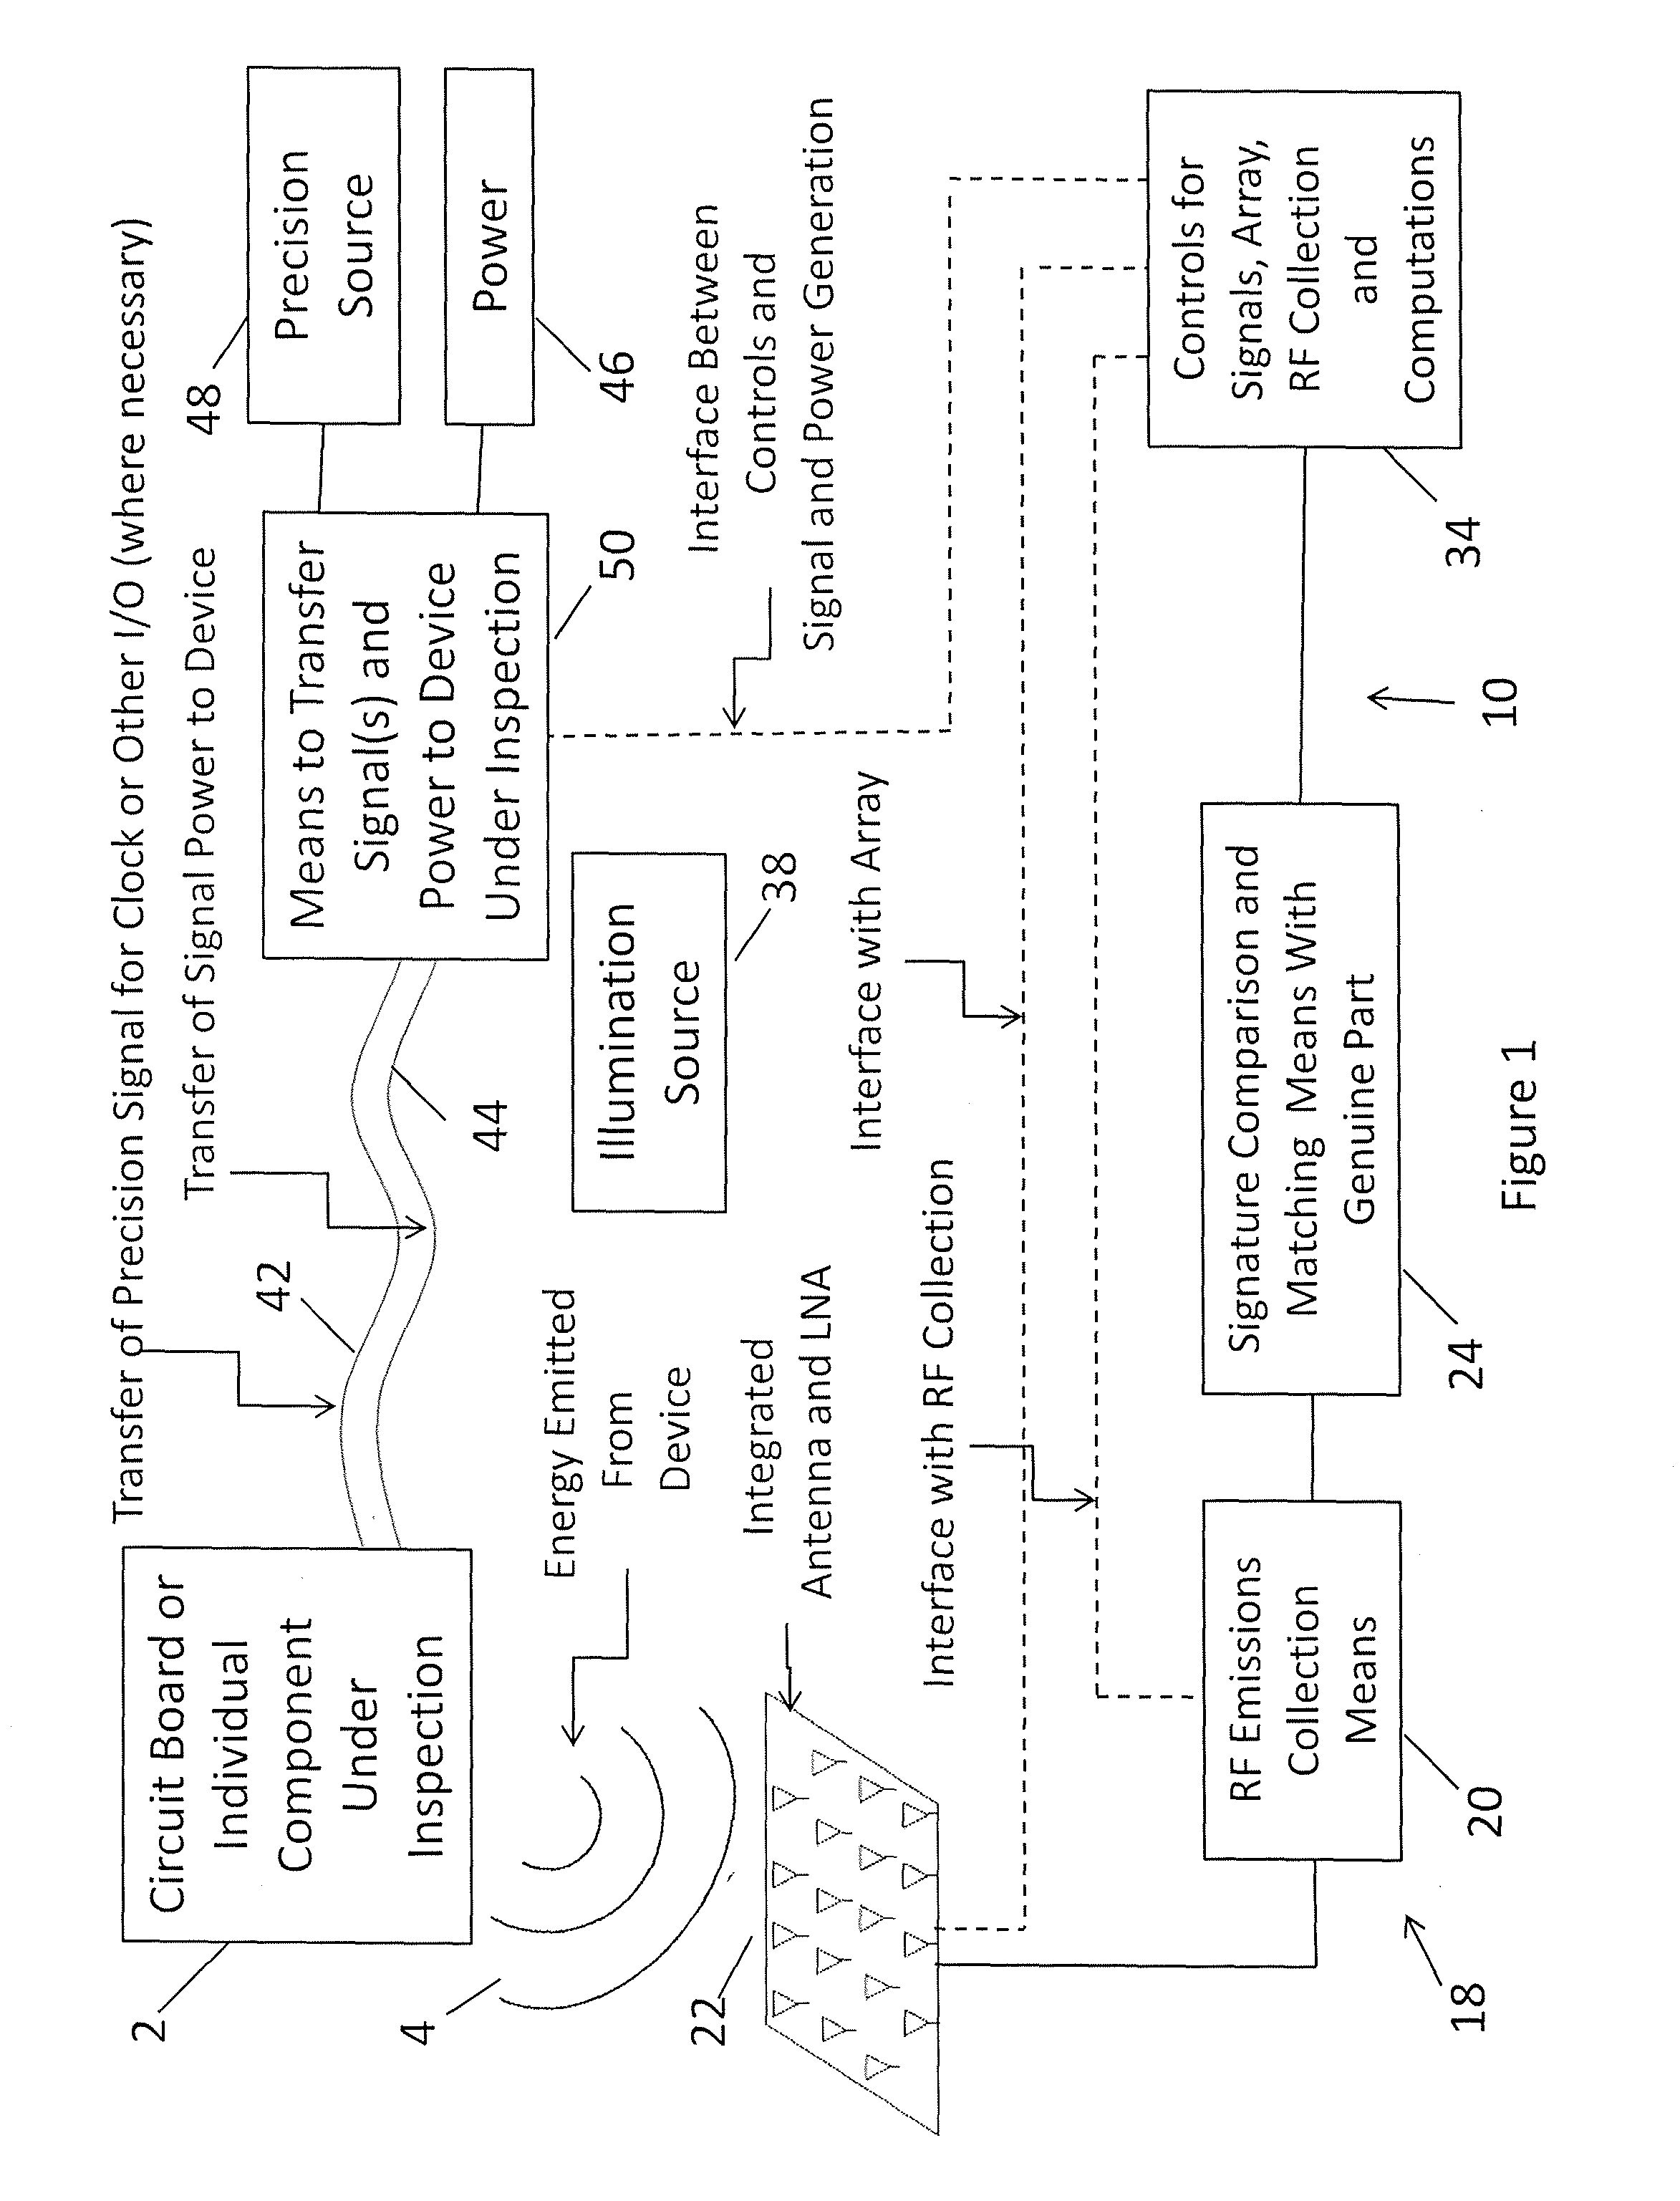 System and method for physically detecting counterfeit electronics